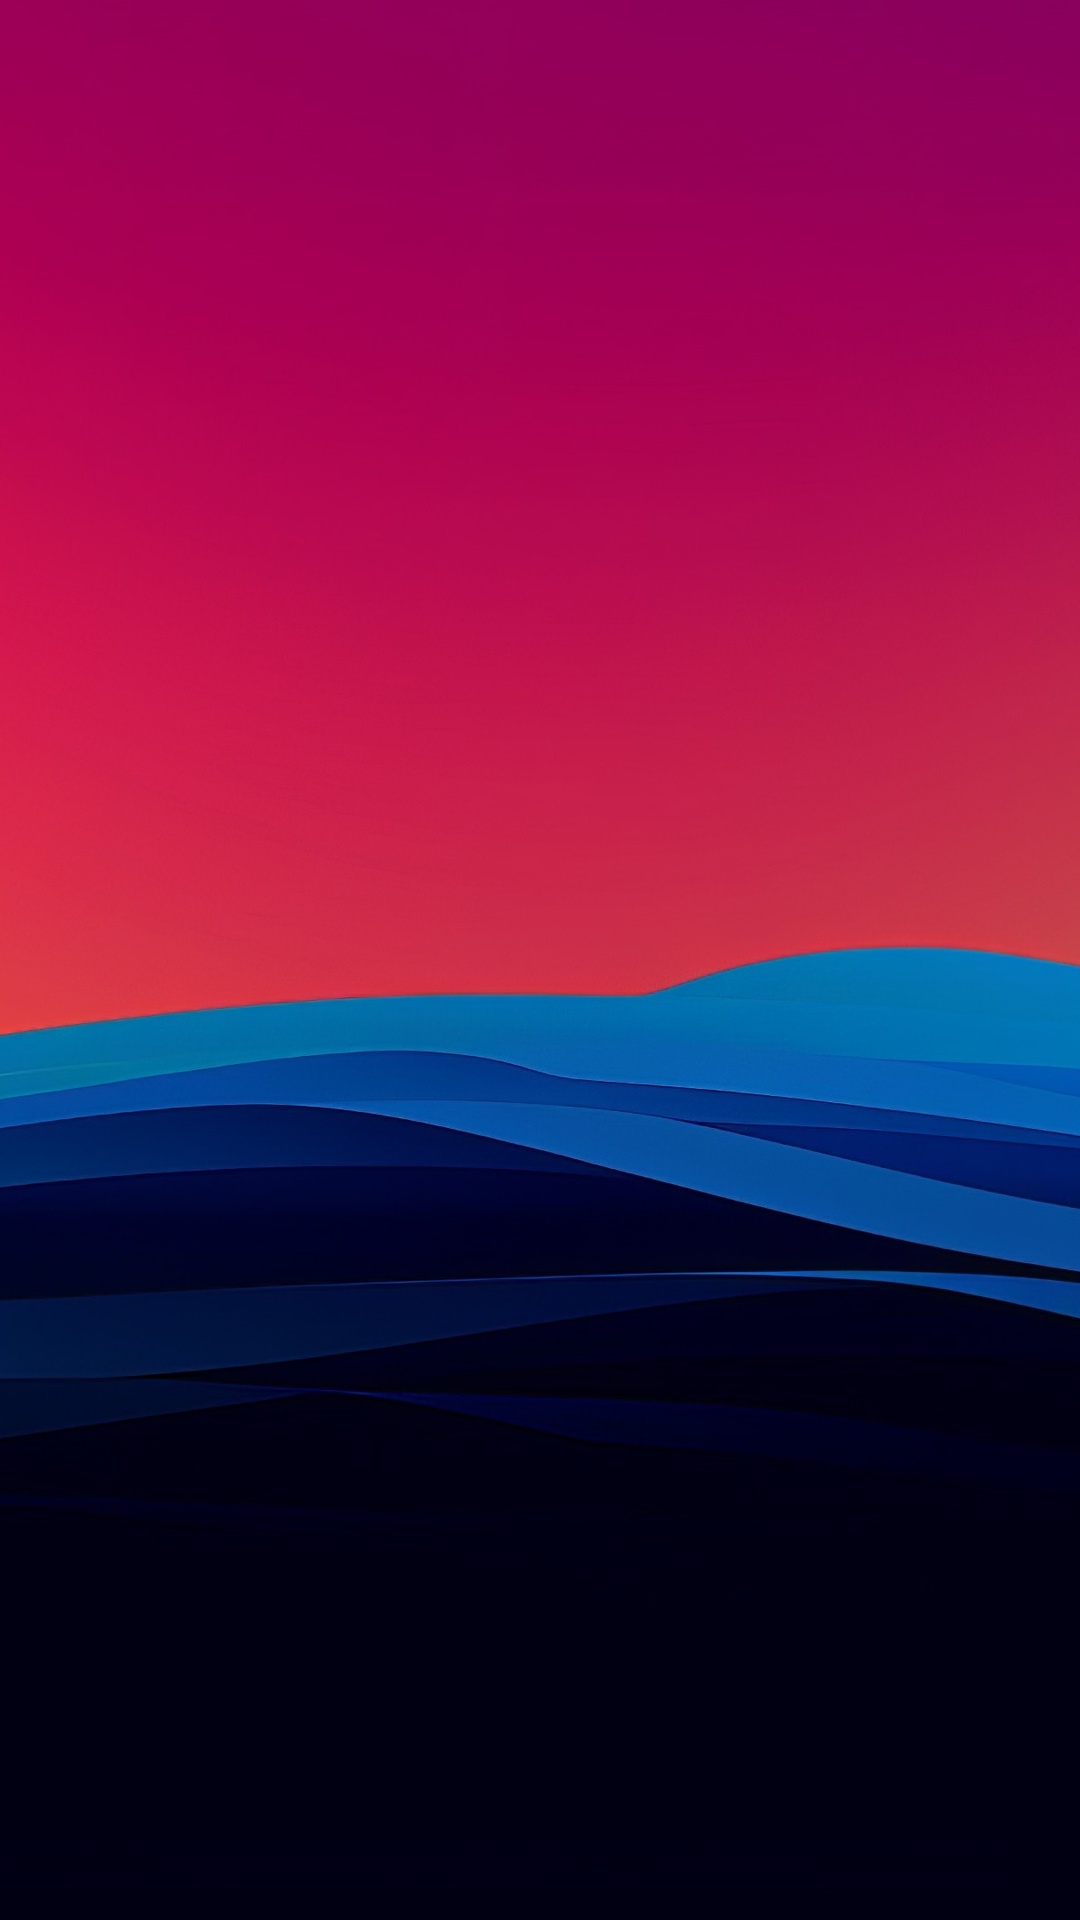 1080x1920 Sea Sunset Abstract 4k Iphone 7,6s,6 Plus, Pixel xl ,One Plus ...